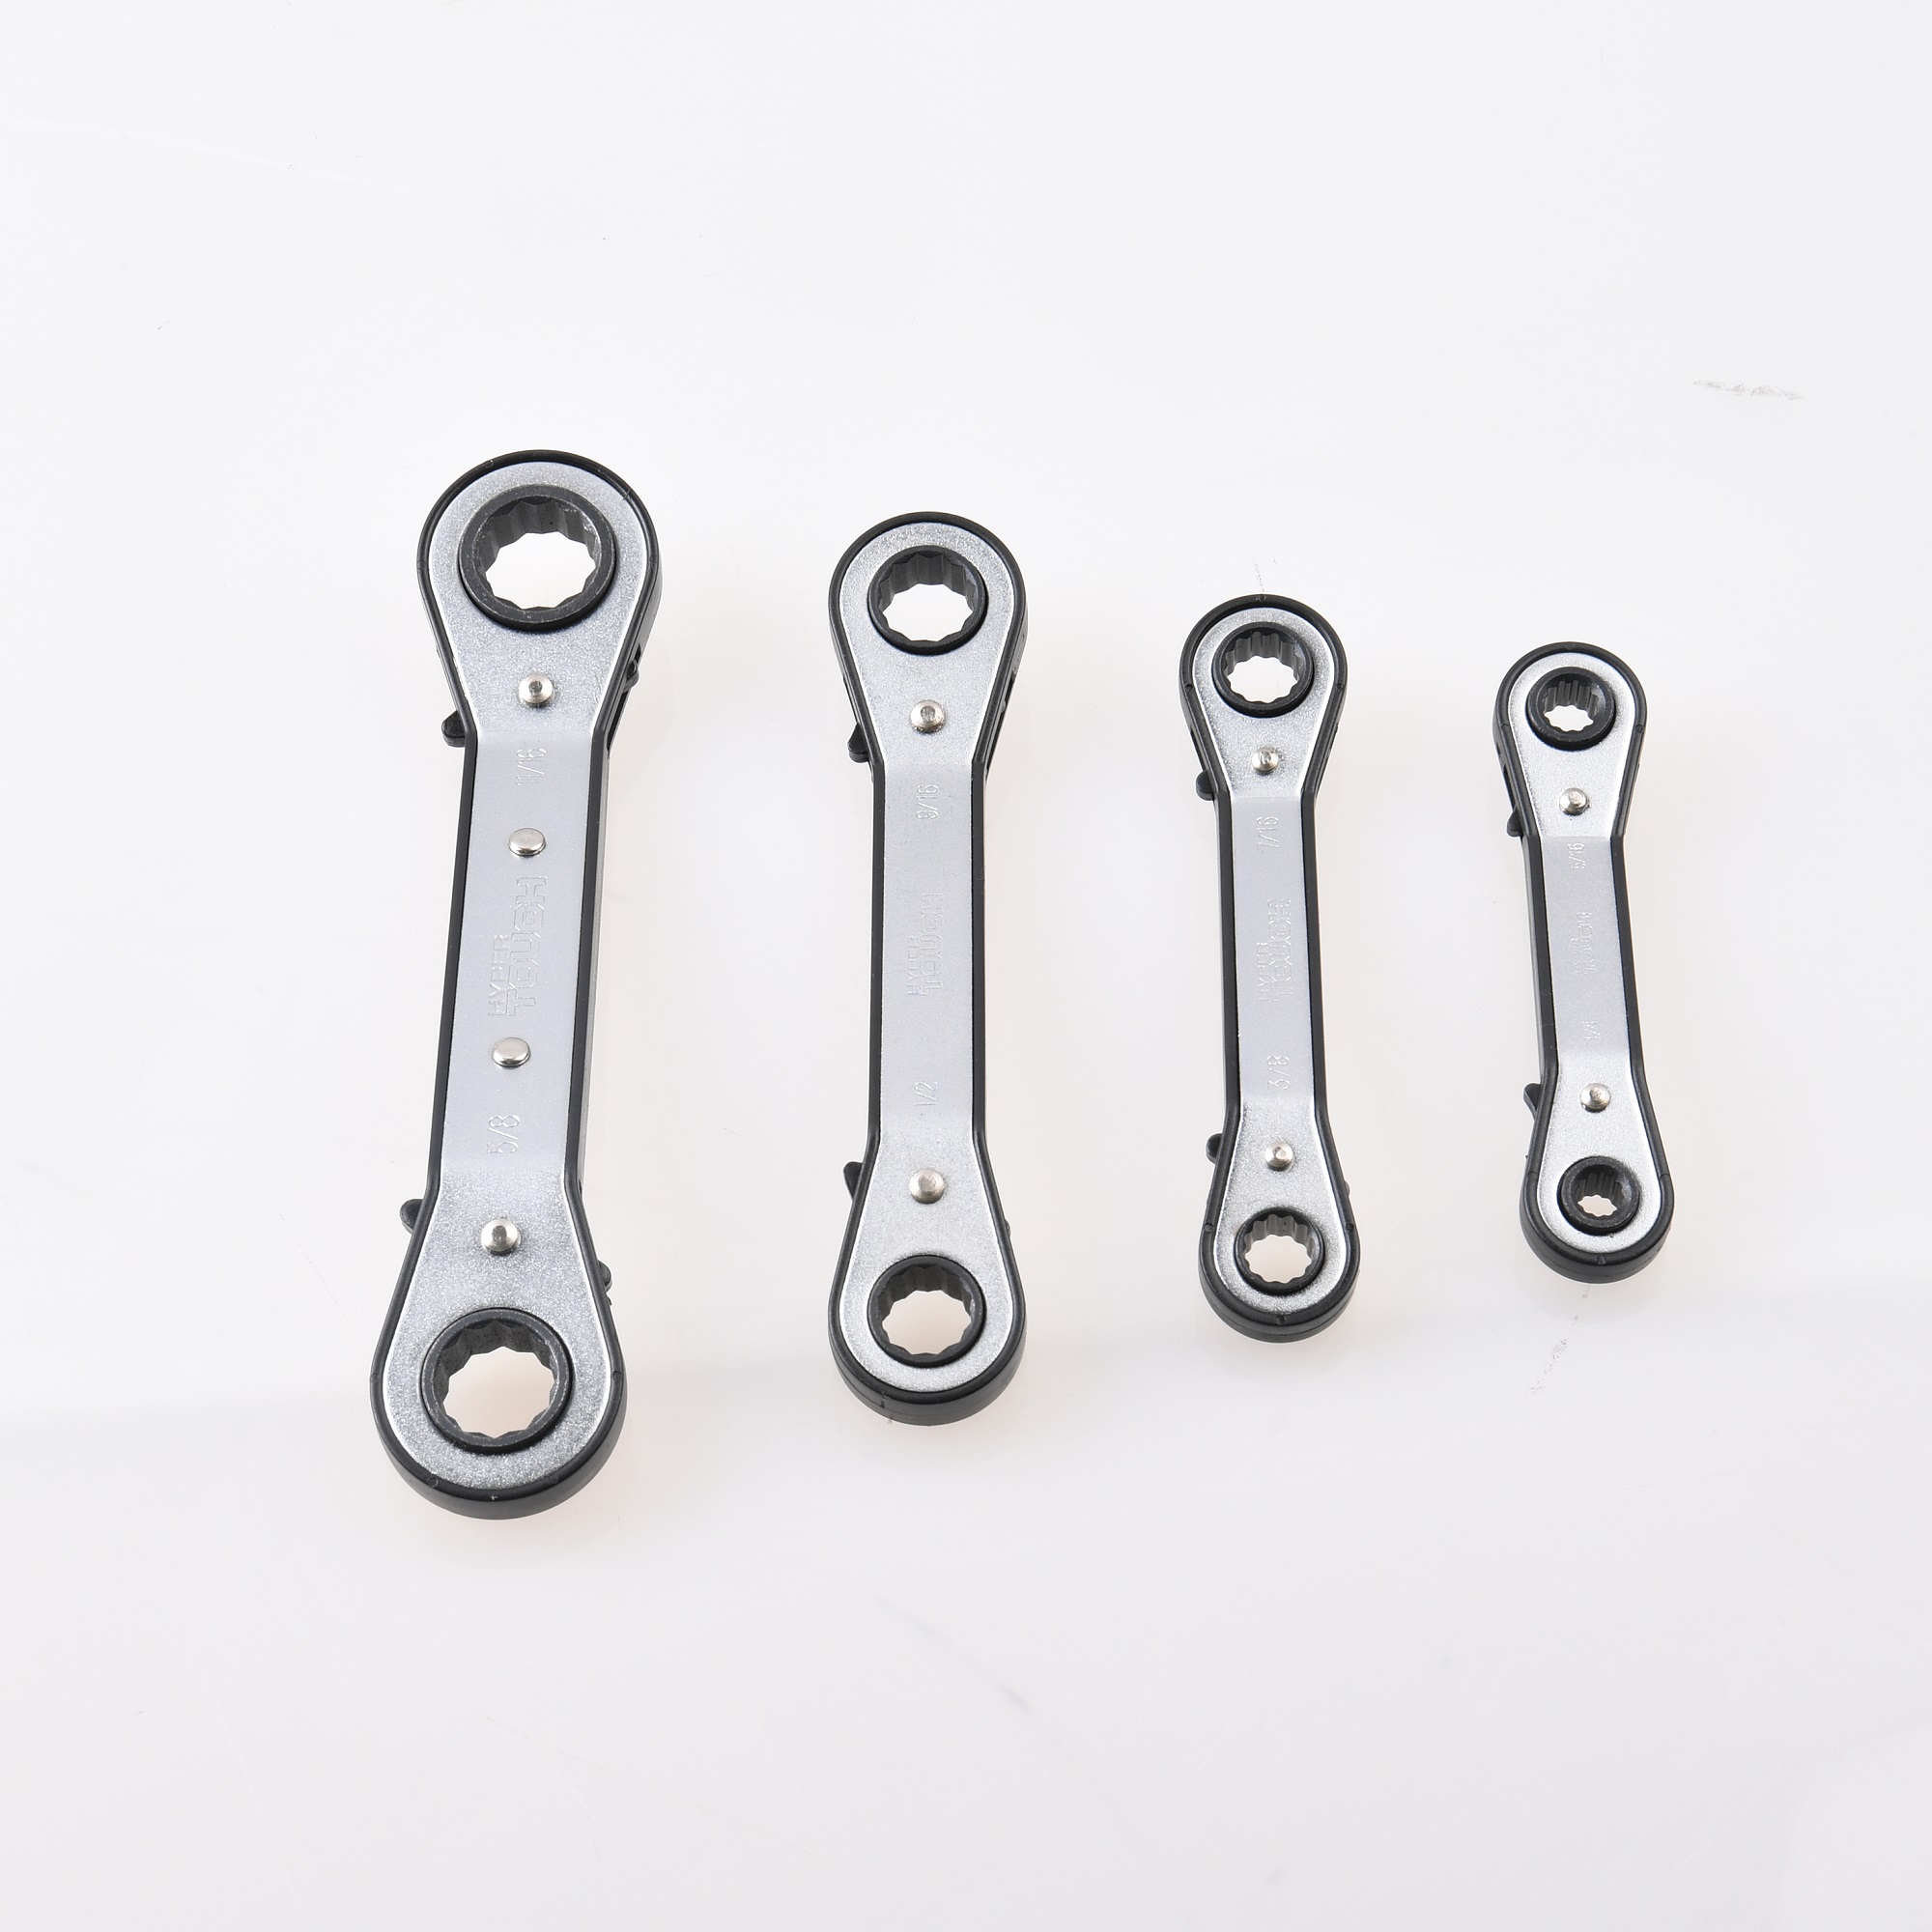 Hyper Tough Heavy-Duty 4-Piece SAE Ratchet Wrench Set - image 5 of 9